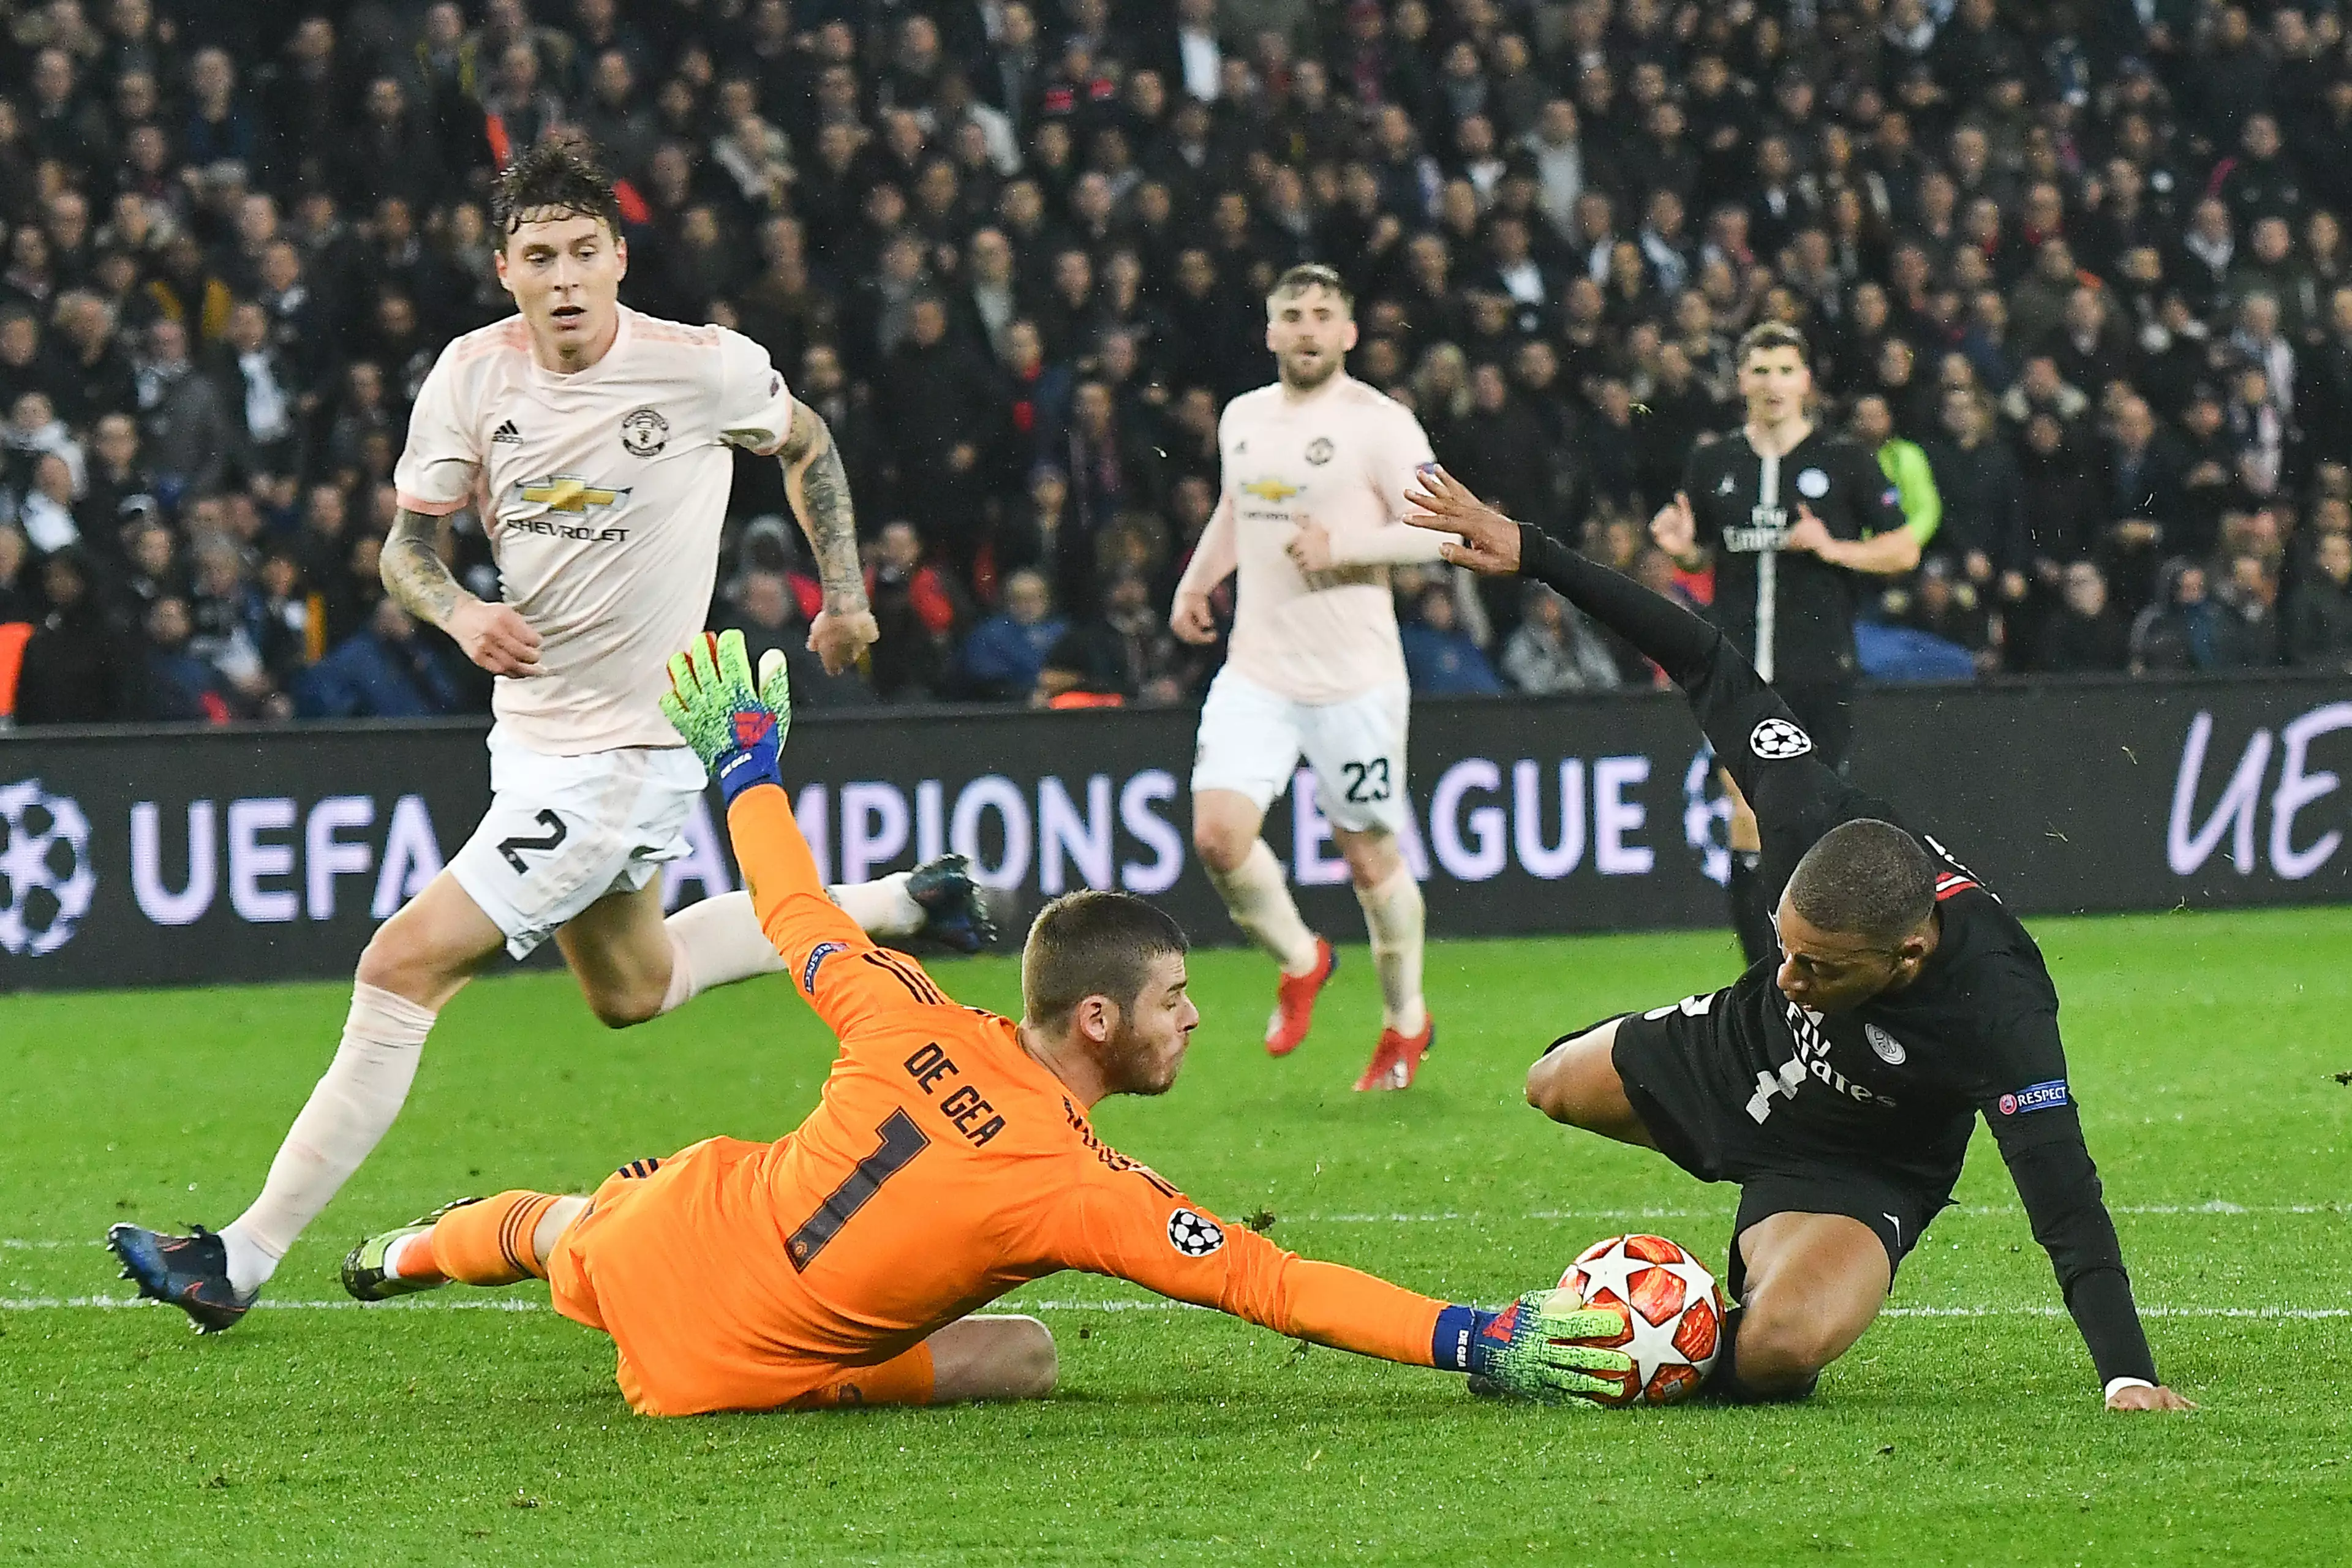 United might need some De Gea heroics to go through. Image: PA Images